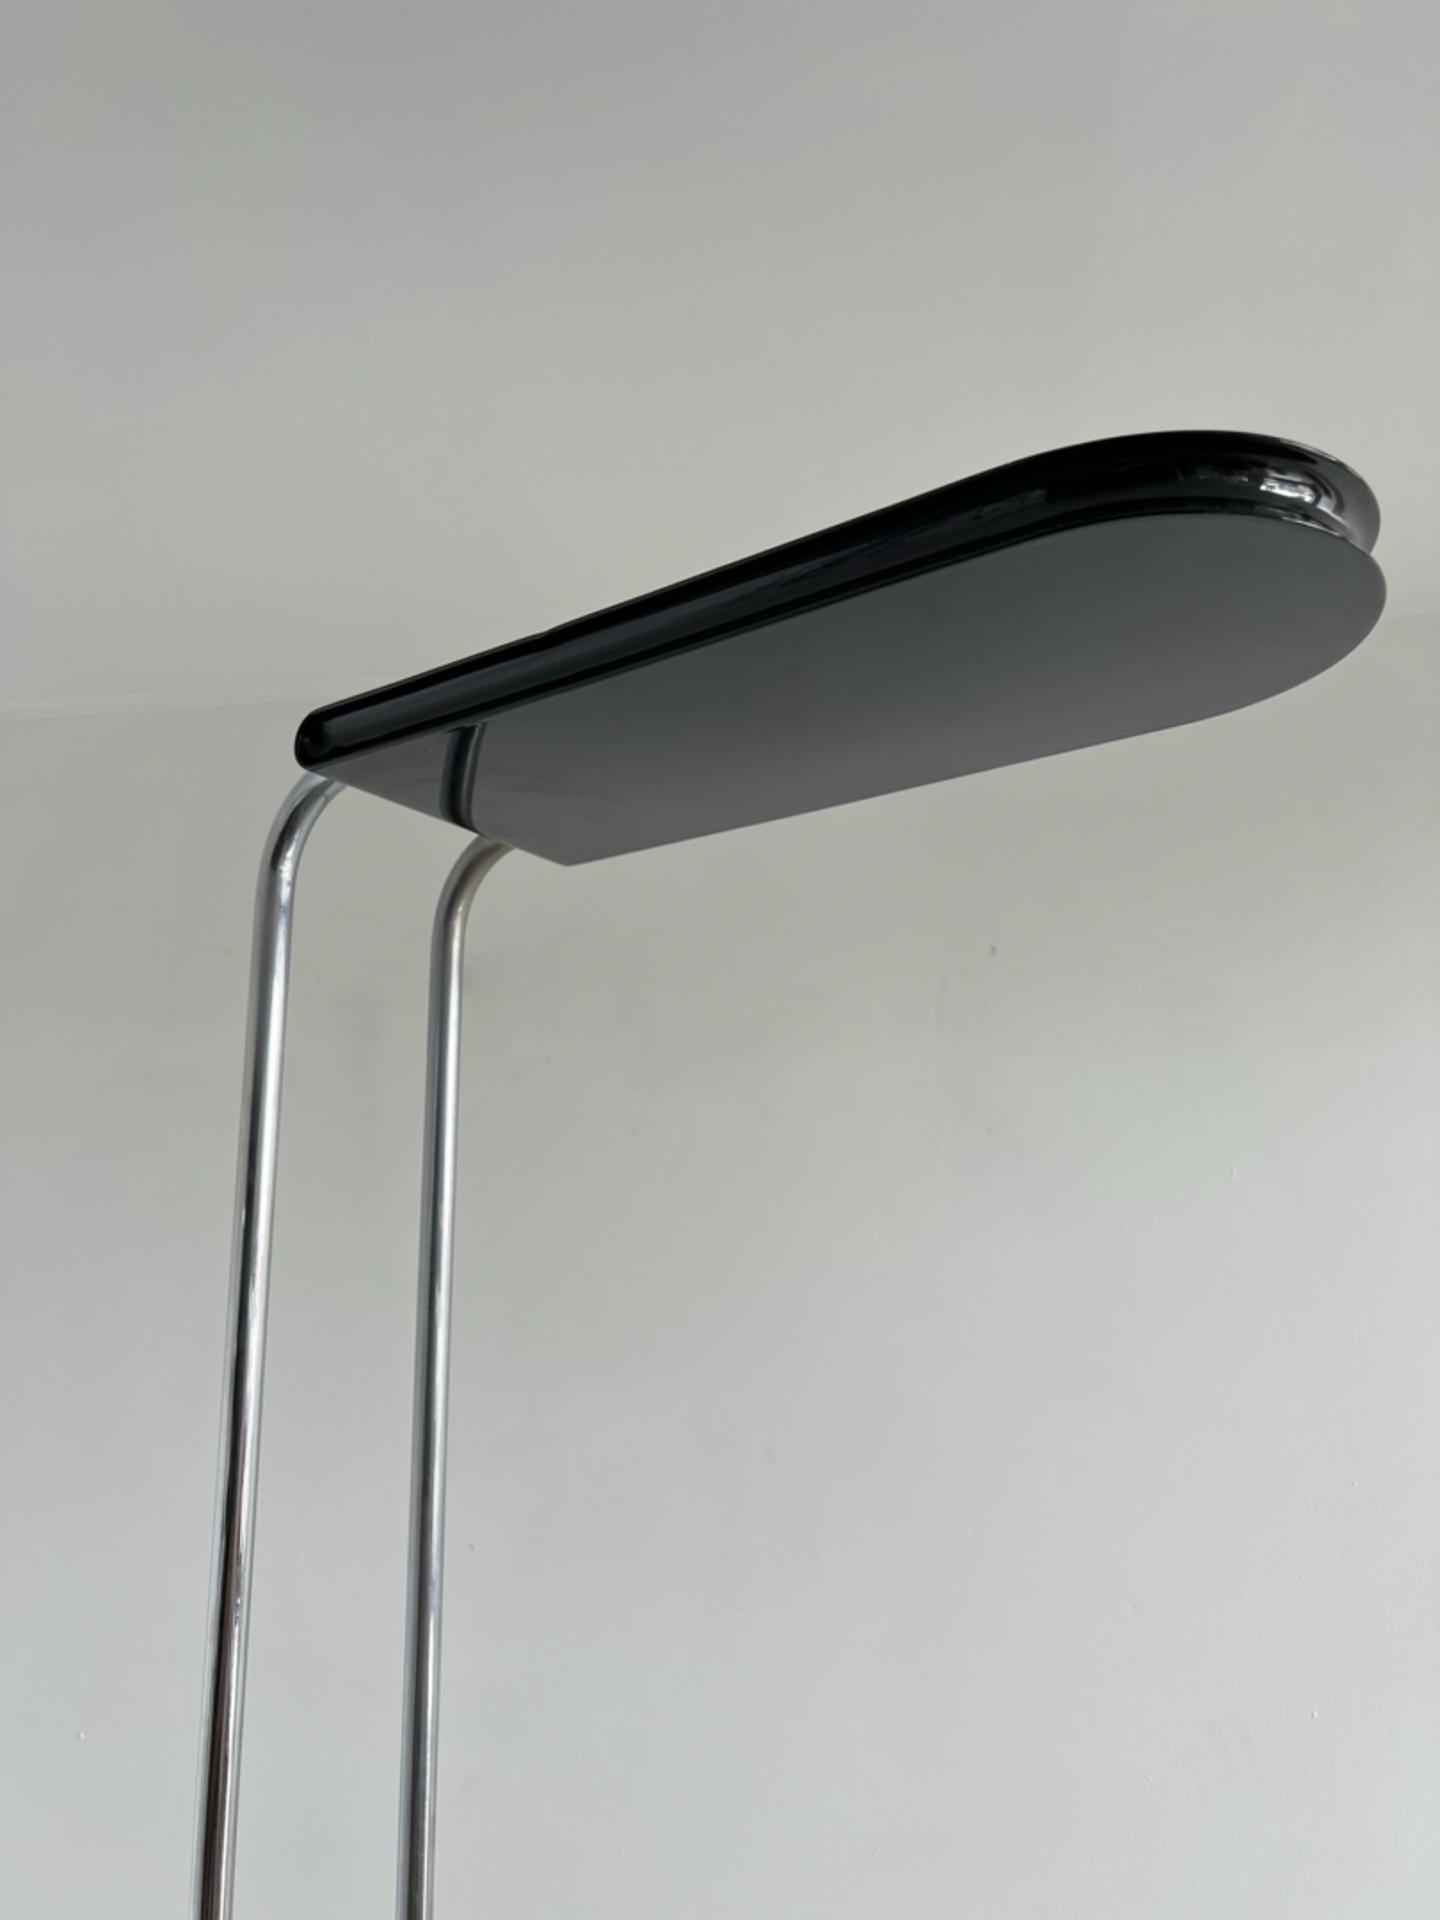 Late 20th Century Gesto Floor Lamp by Bruno Gecchelin for Skipper 1970s For Sale